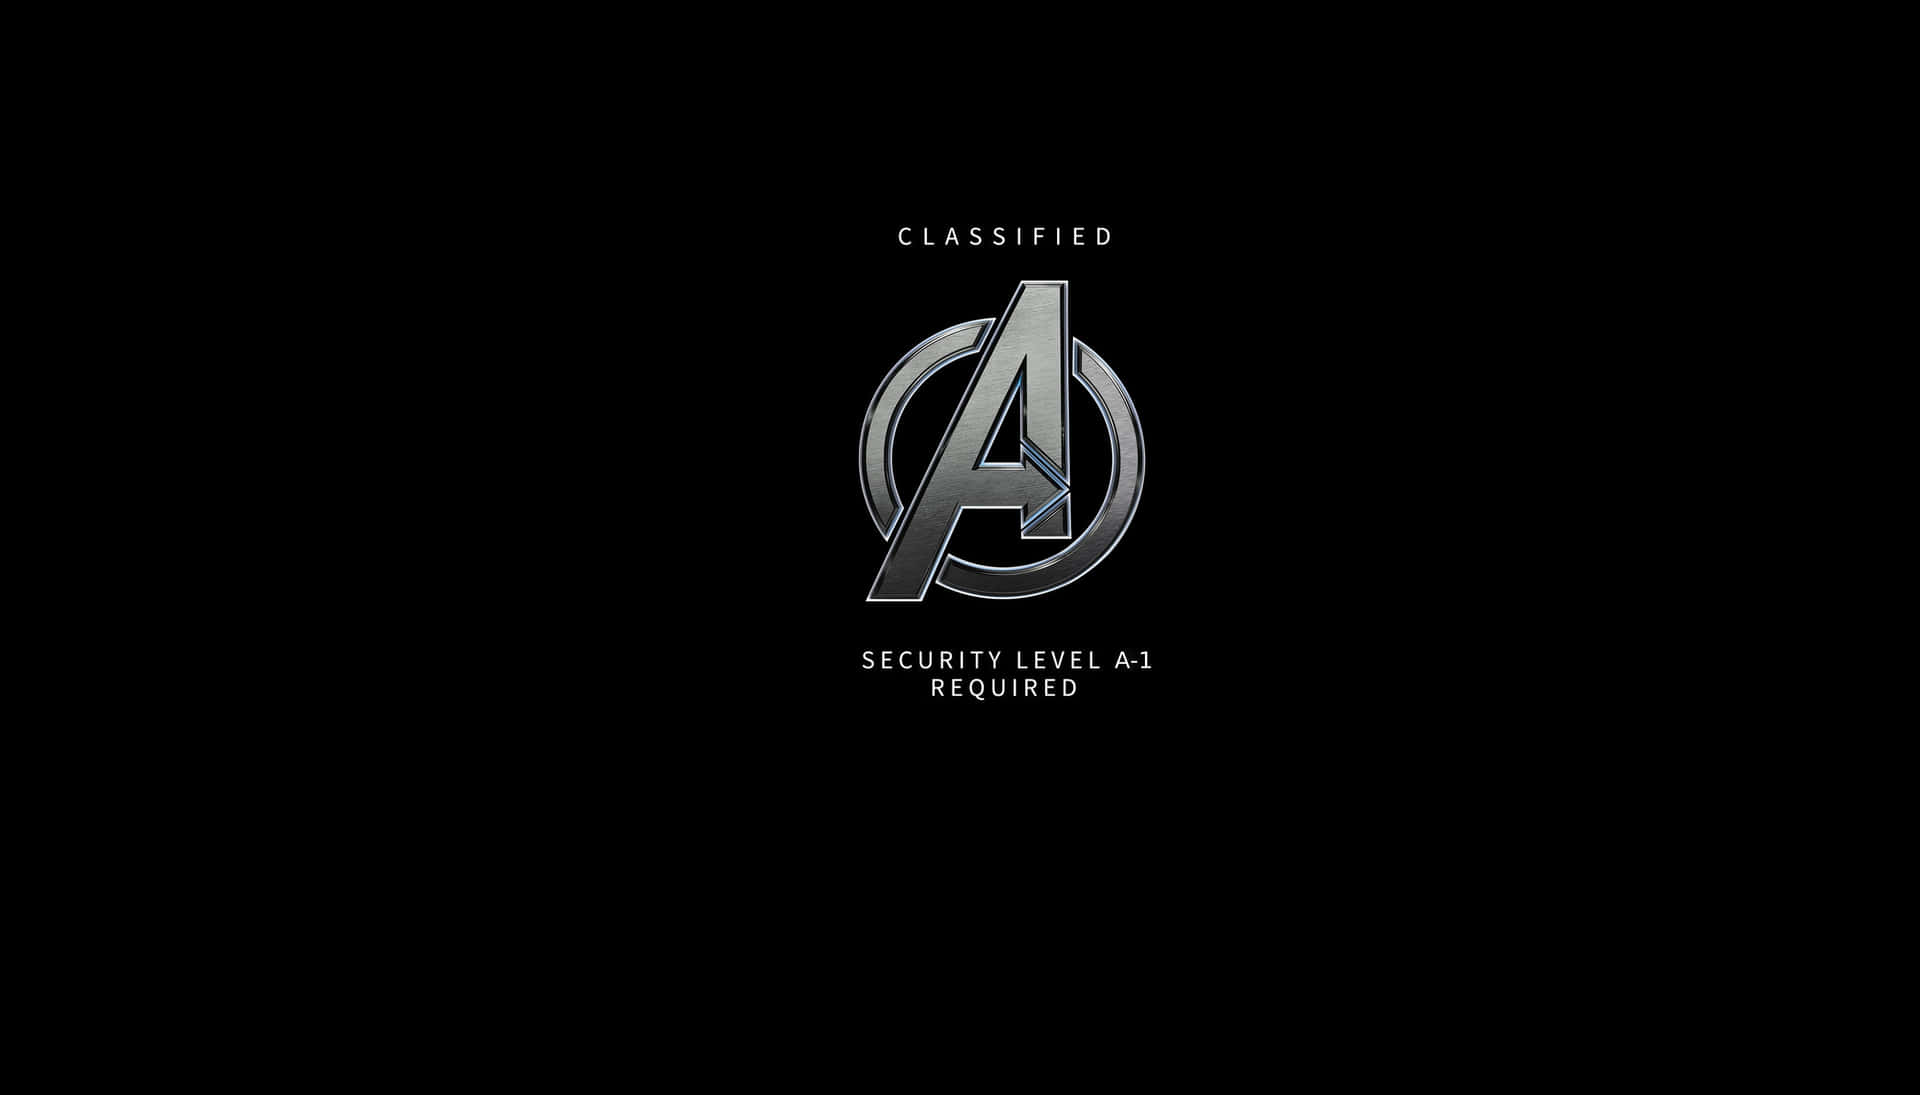 Avengers Classified Security Level A1 Wallpaper